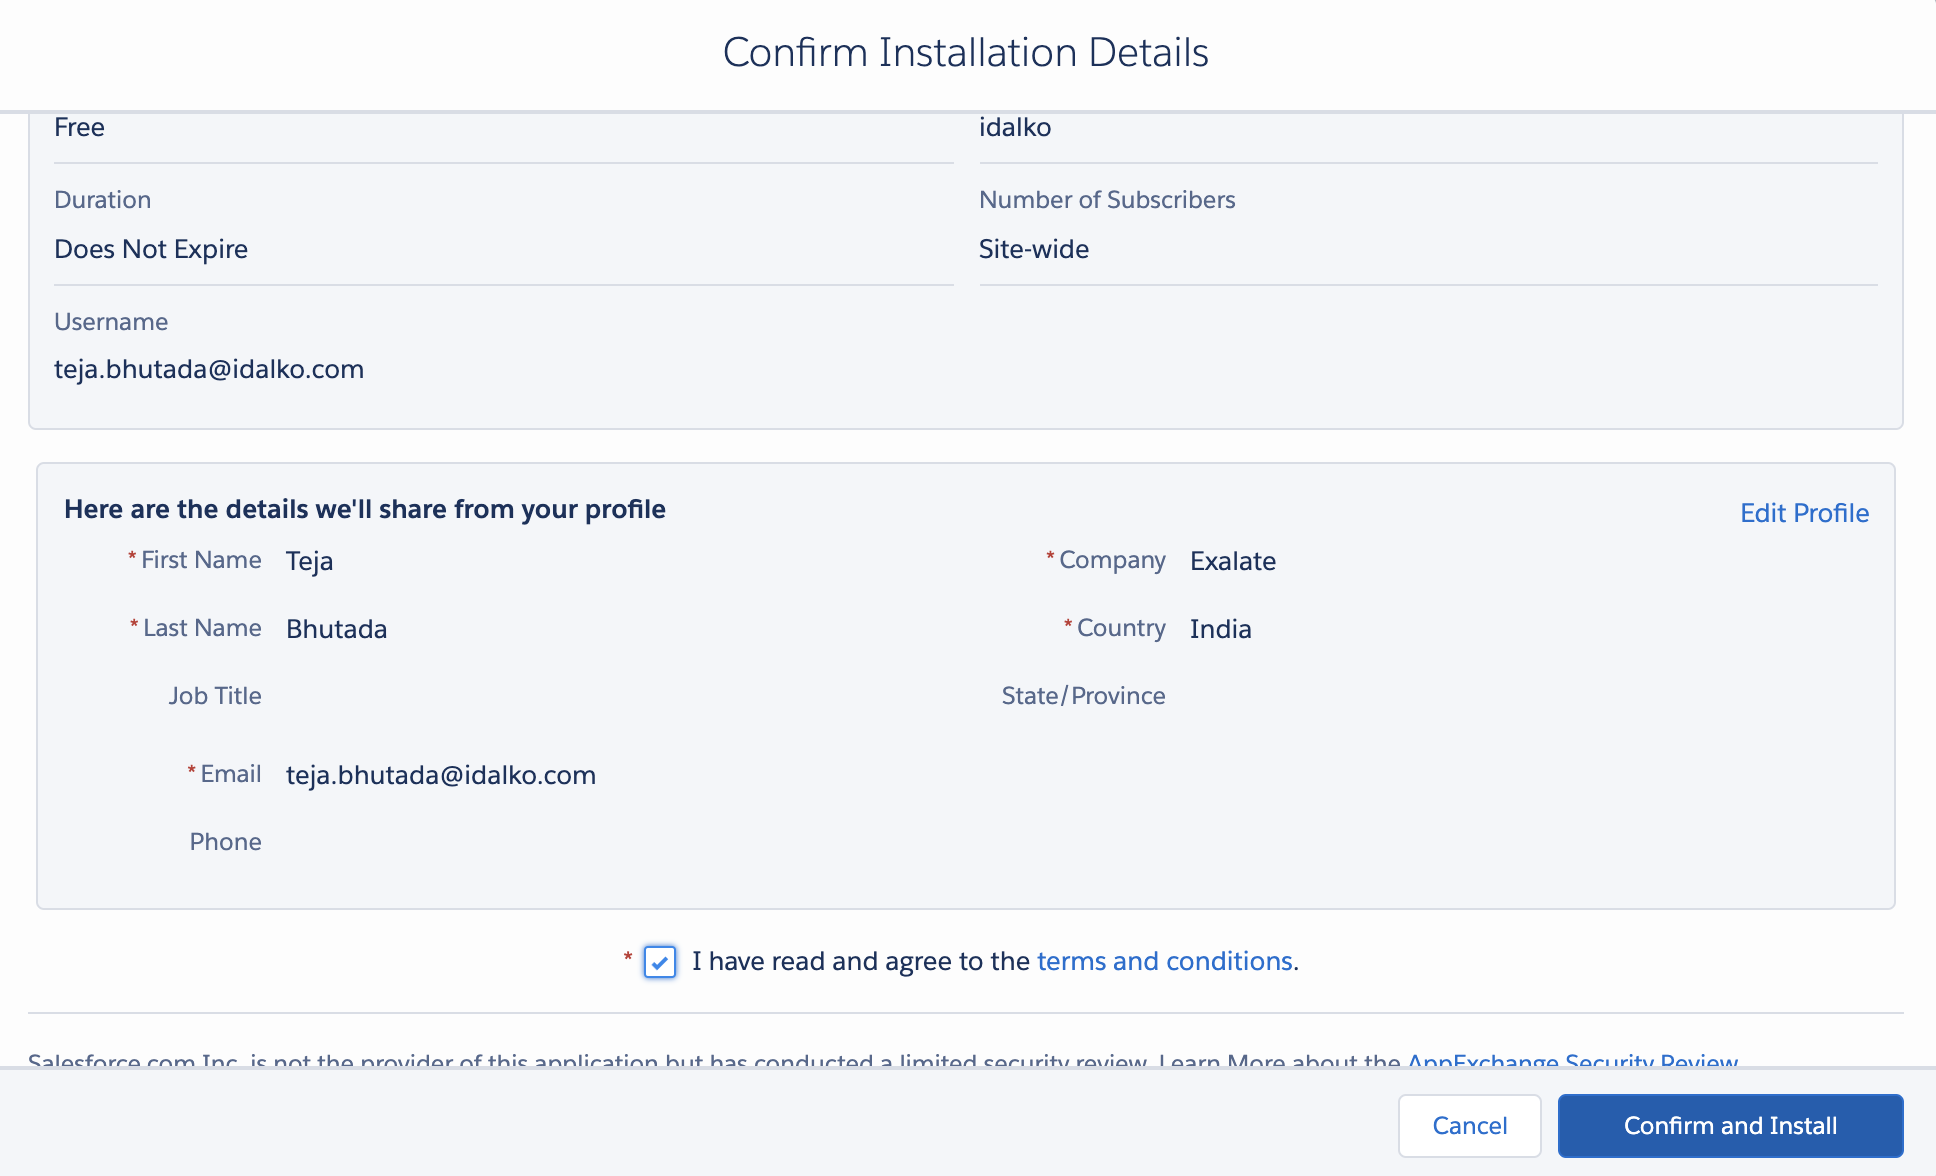 Confirm installation of Exalate on Salesforce